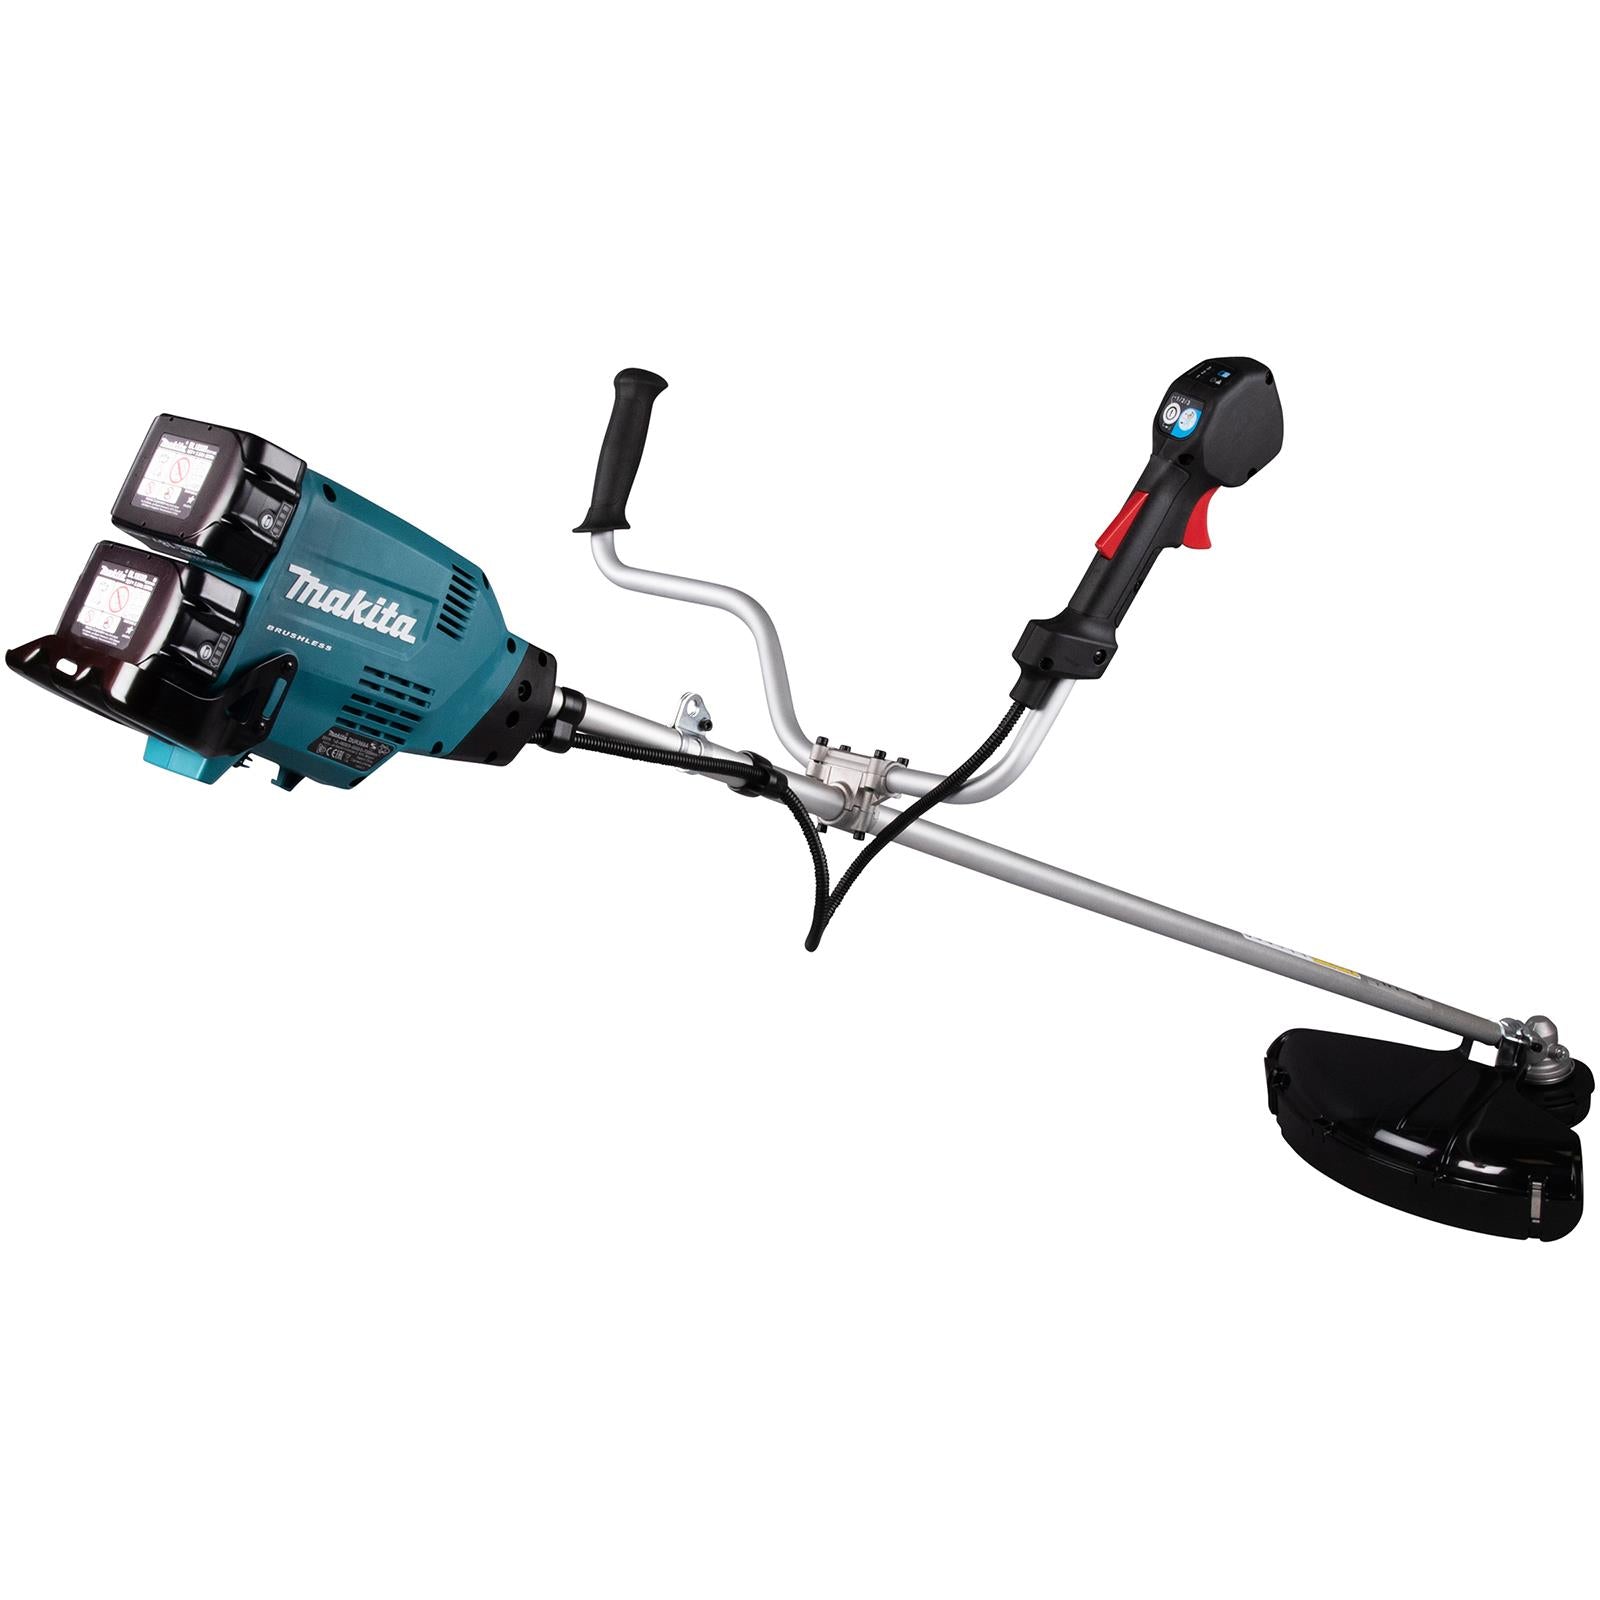 Makita Brush Cutter Kit 2 x 18V LXT Brushless Cordless Garden Lawn Strimming 2 x 5Ah Battery and Dual Rapid Charger DUR369APT2